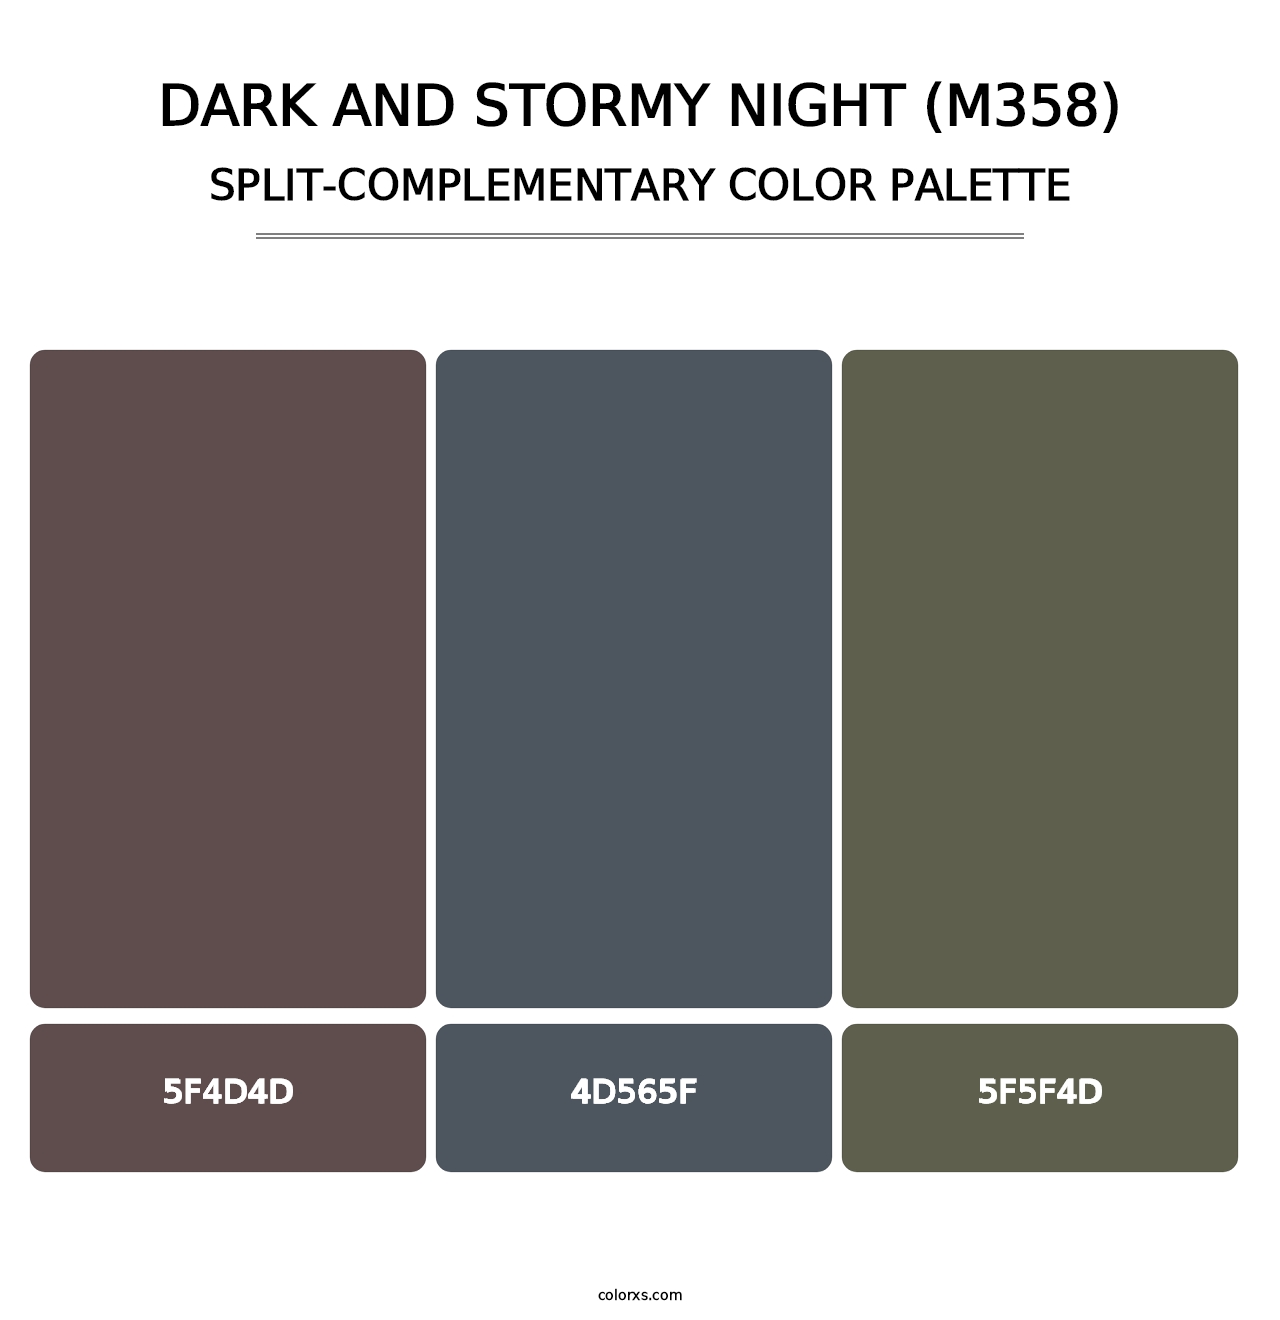 Dark and Stormy Night (M358) - Split-Complementary Color Palette